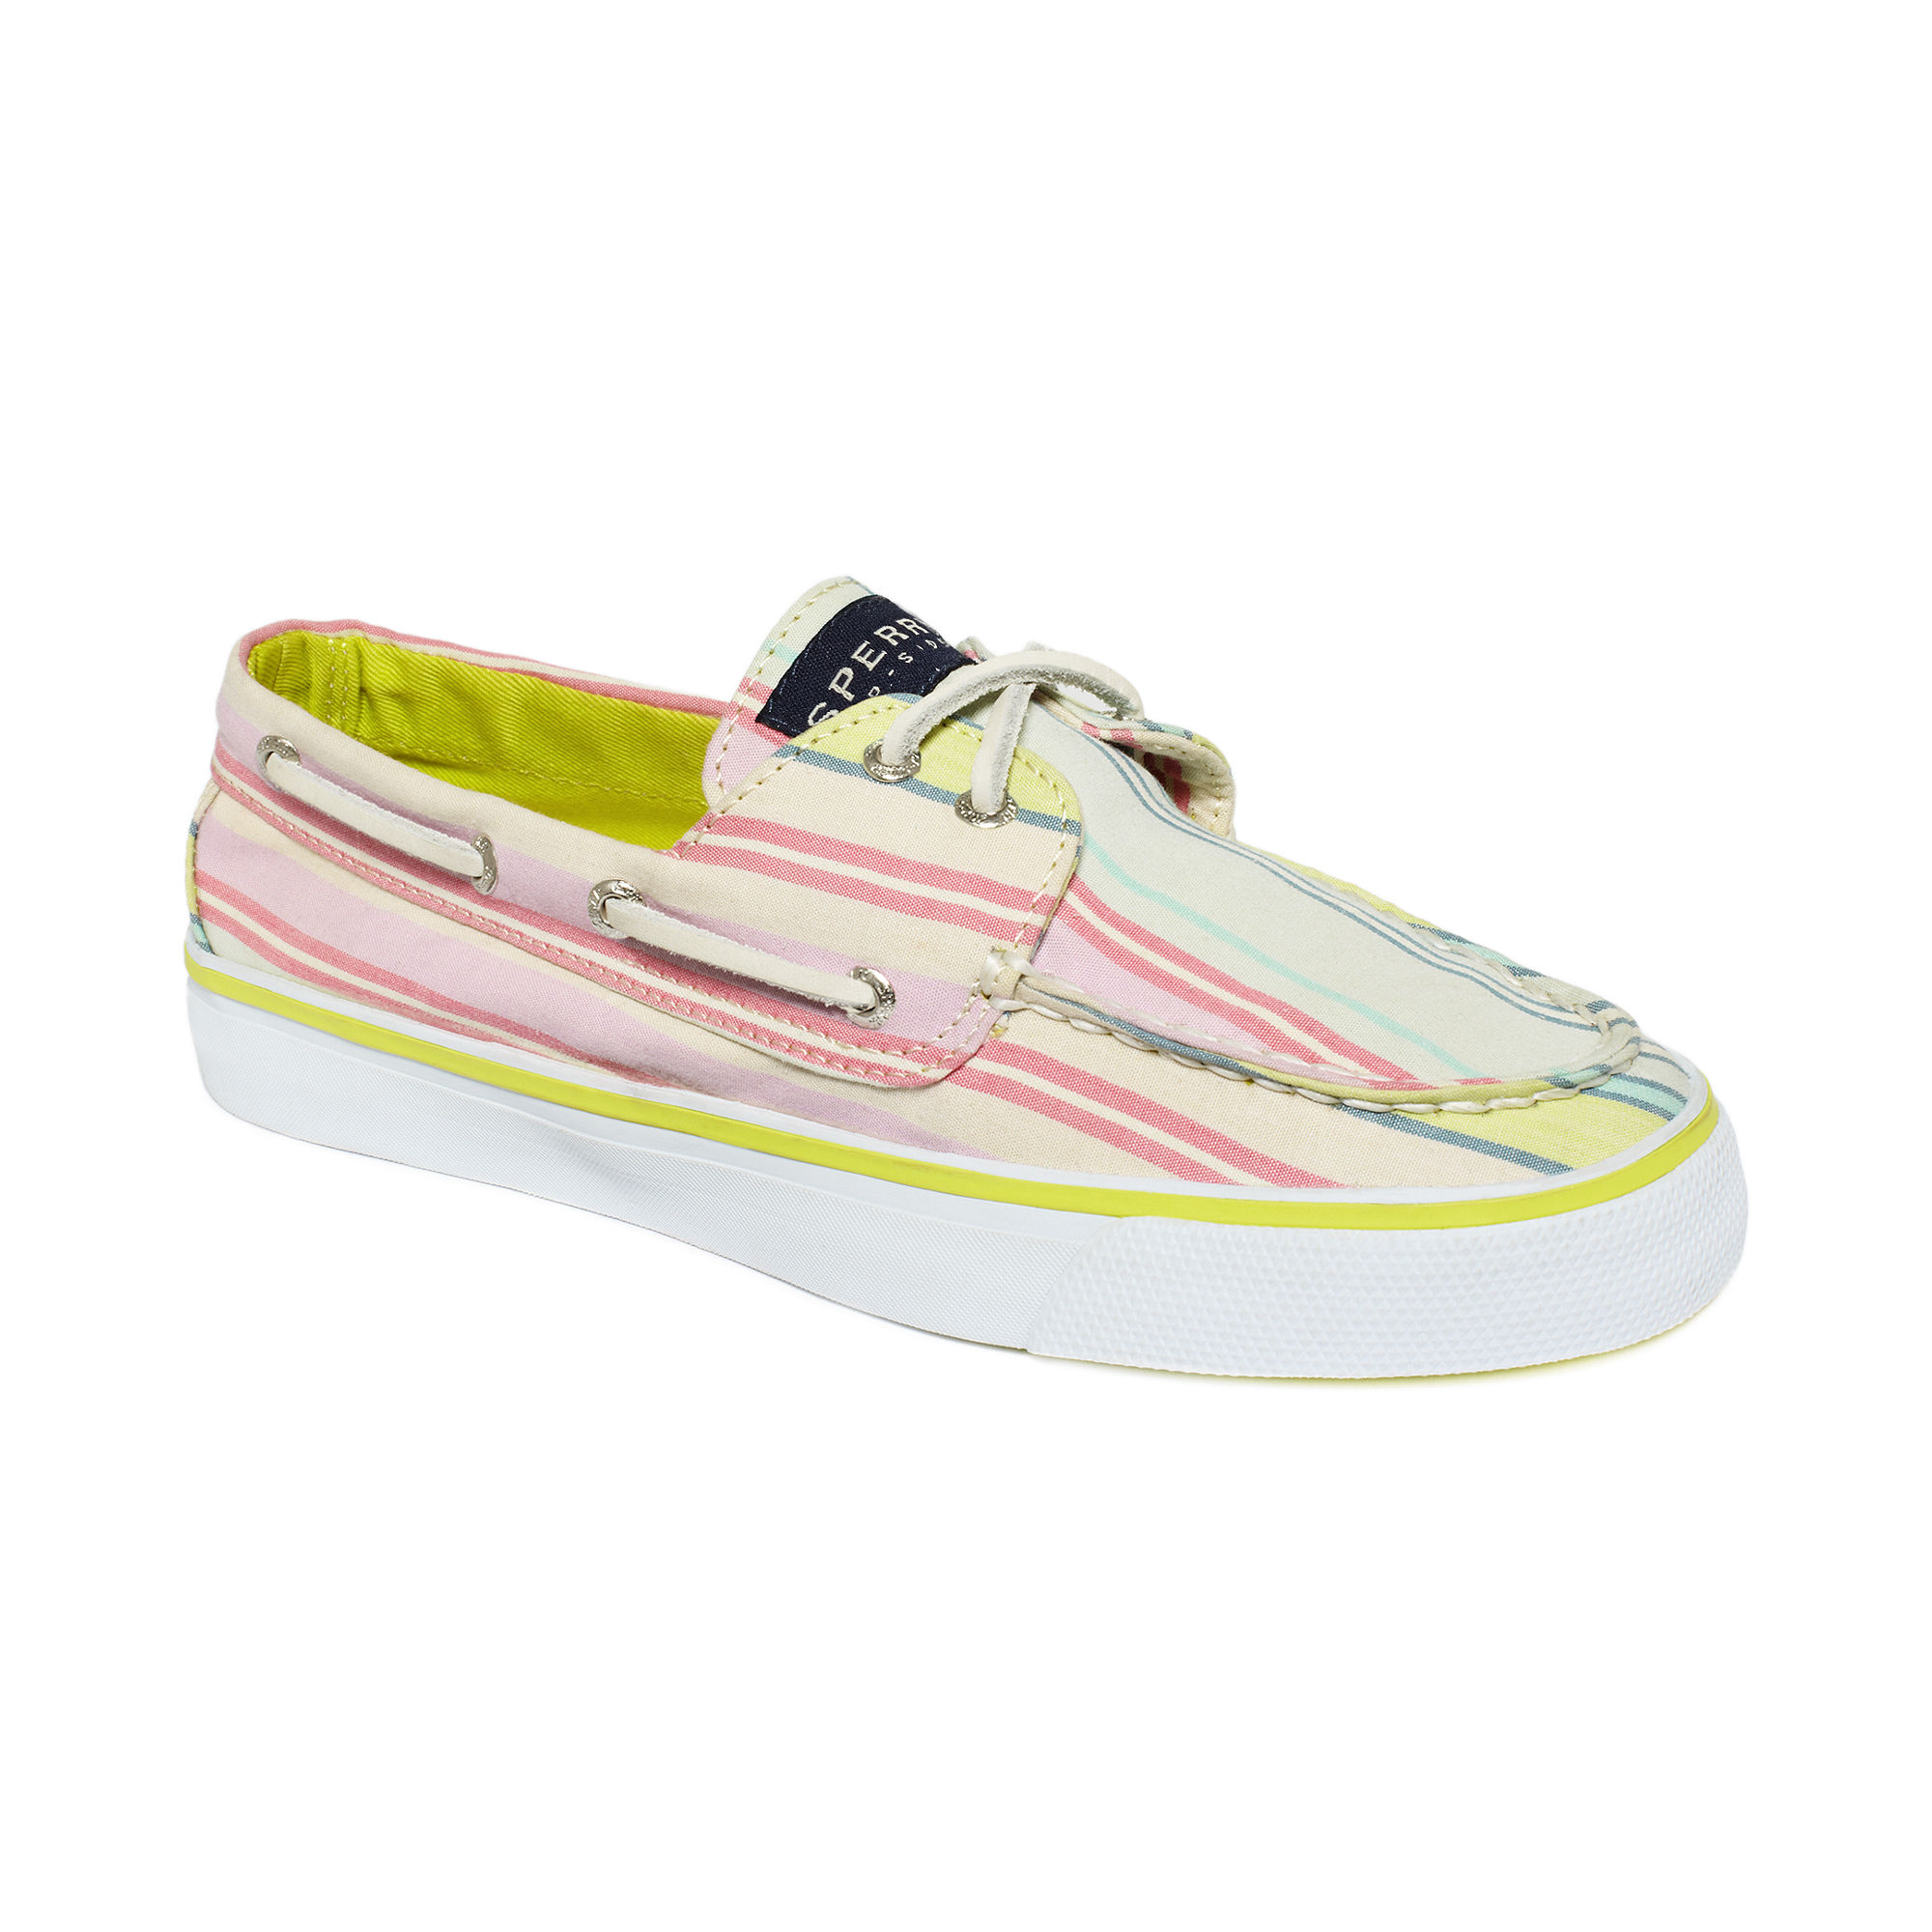 Sperry Top-sider Bahama Boat Shoes in Beige (Pink/Lime Stripe) | Lyst